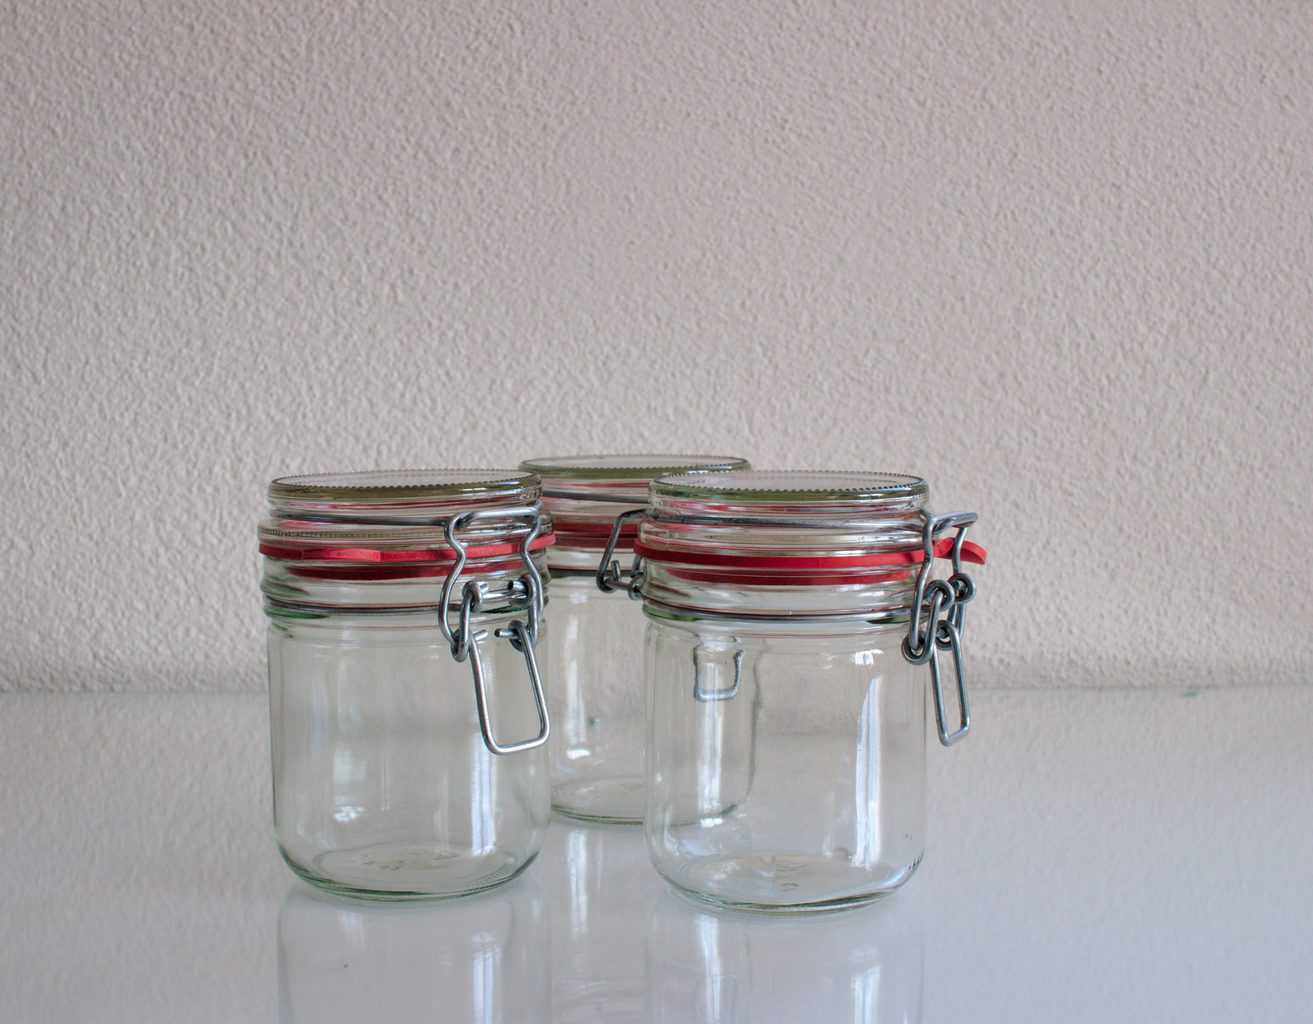 Canning Jars for Pantry Organization